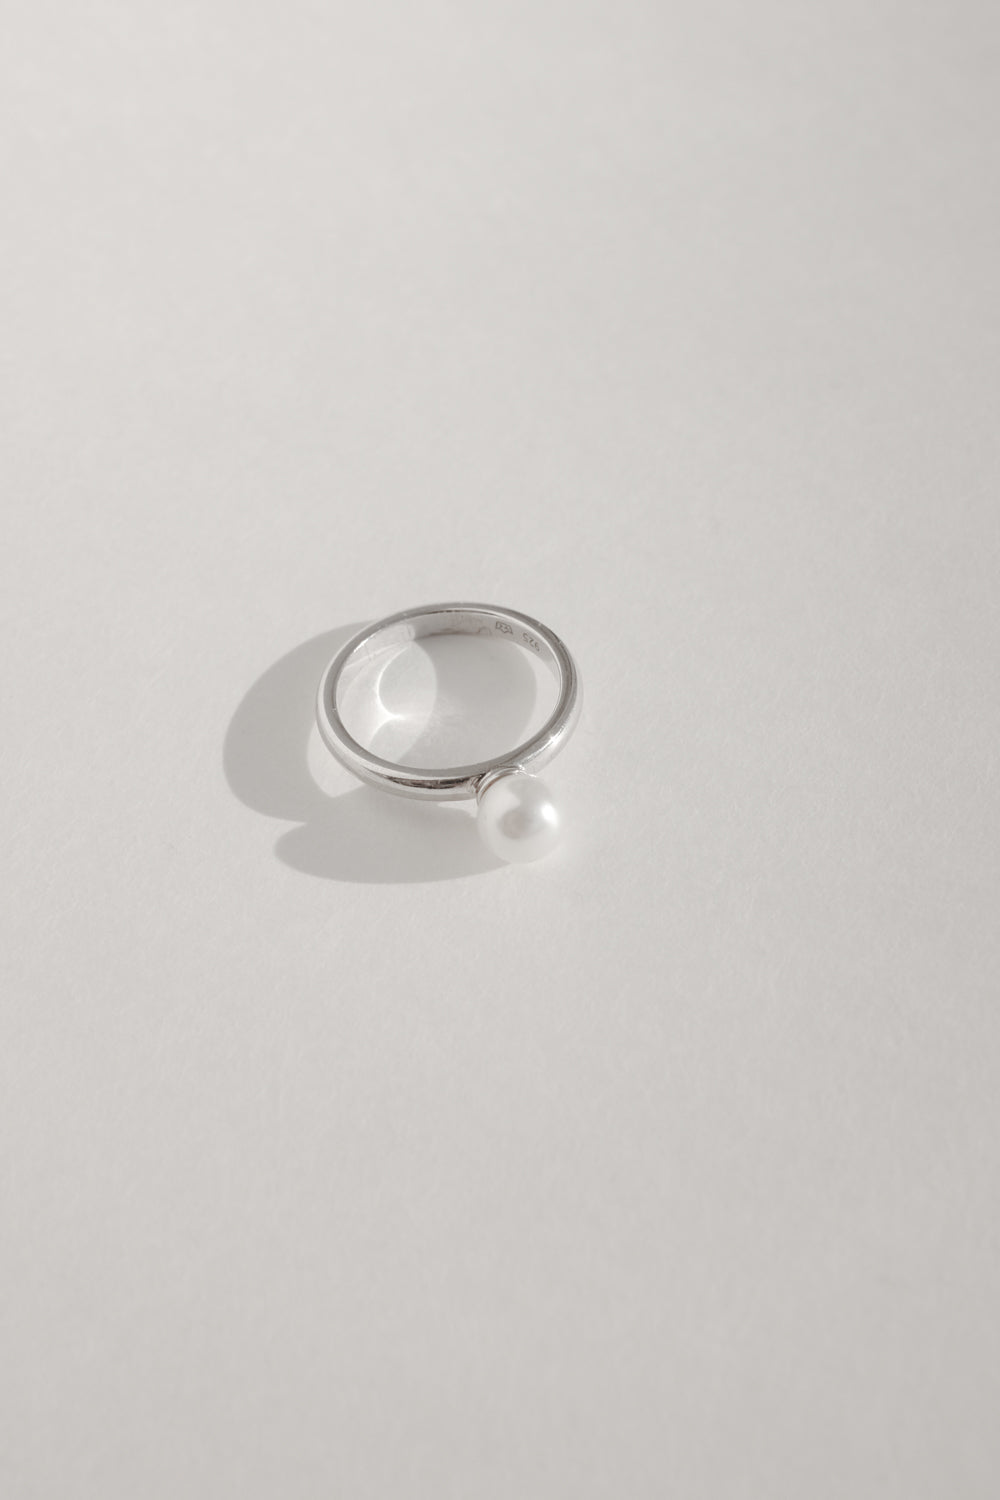 OFF WHITE PEARL STERLING SILVER VINTAGE RING